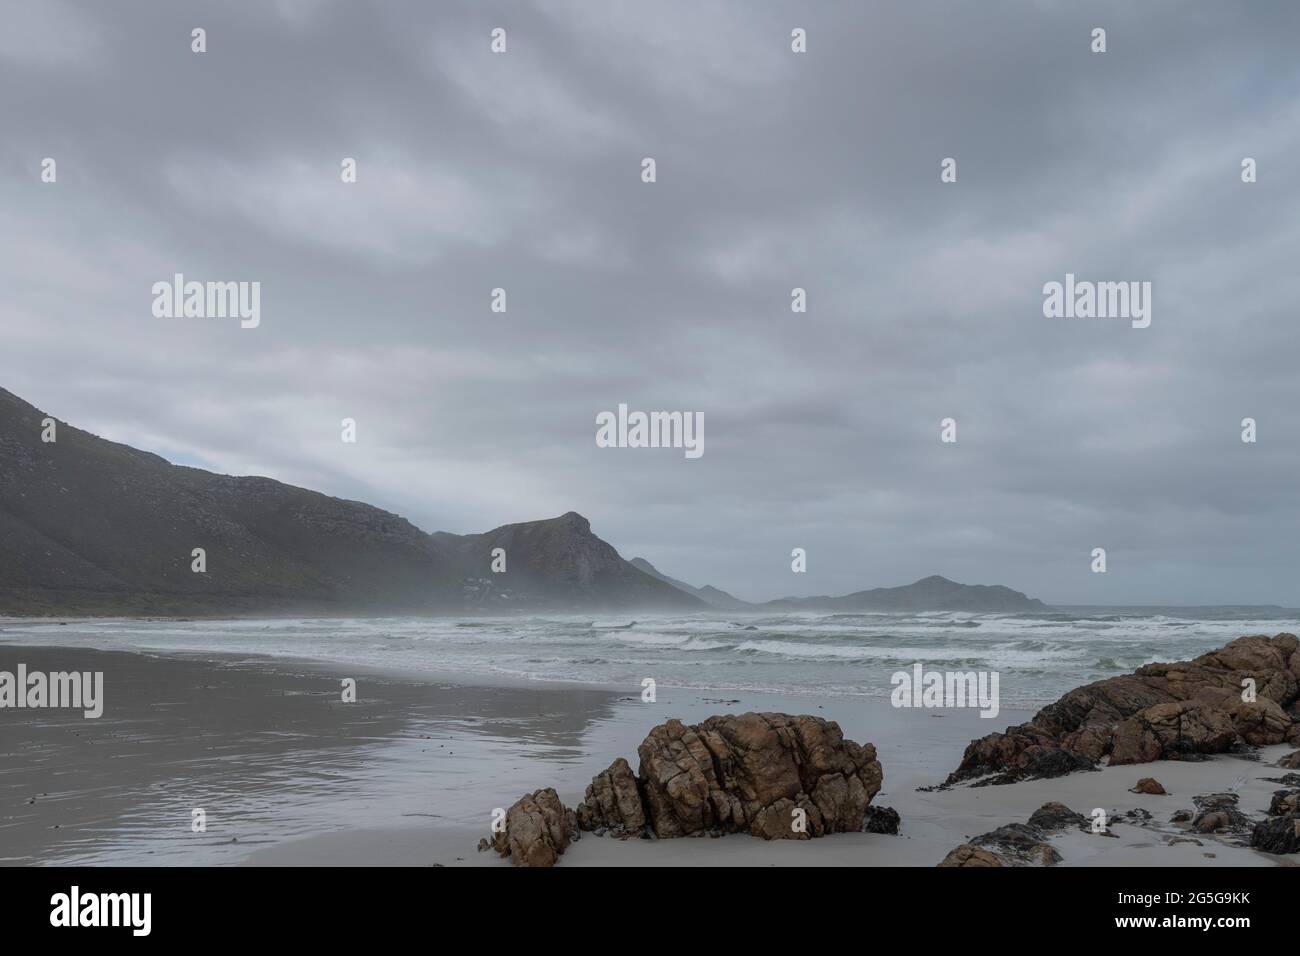 View of Misty Cliffs on Cape Peninsula Atlantic coast from Witsands beach, Cape Town, South Africa. On overcast, cold, wet day. Winter. Stock Photo